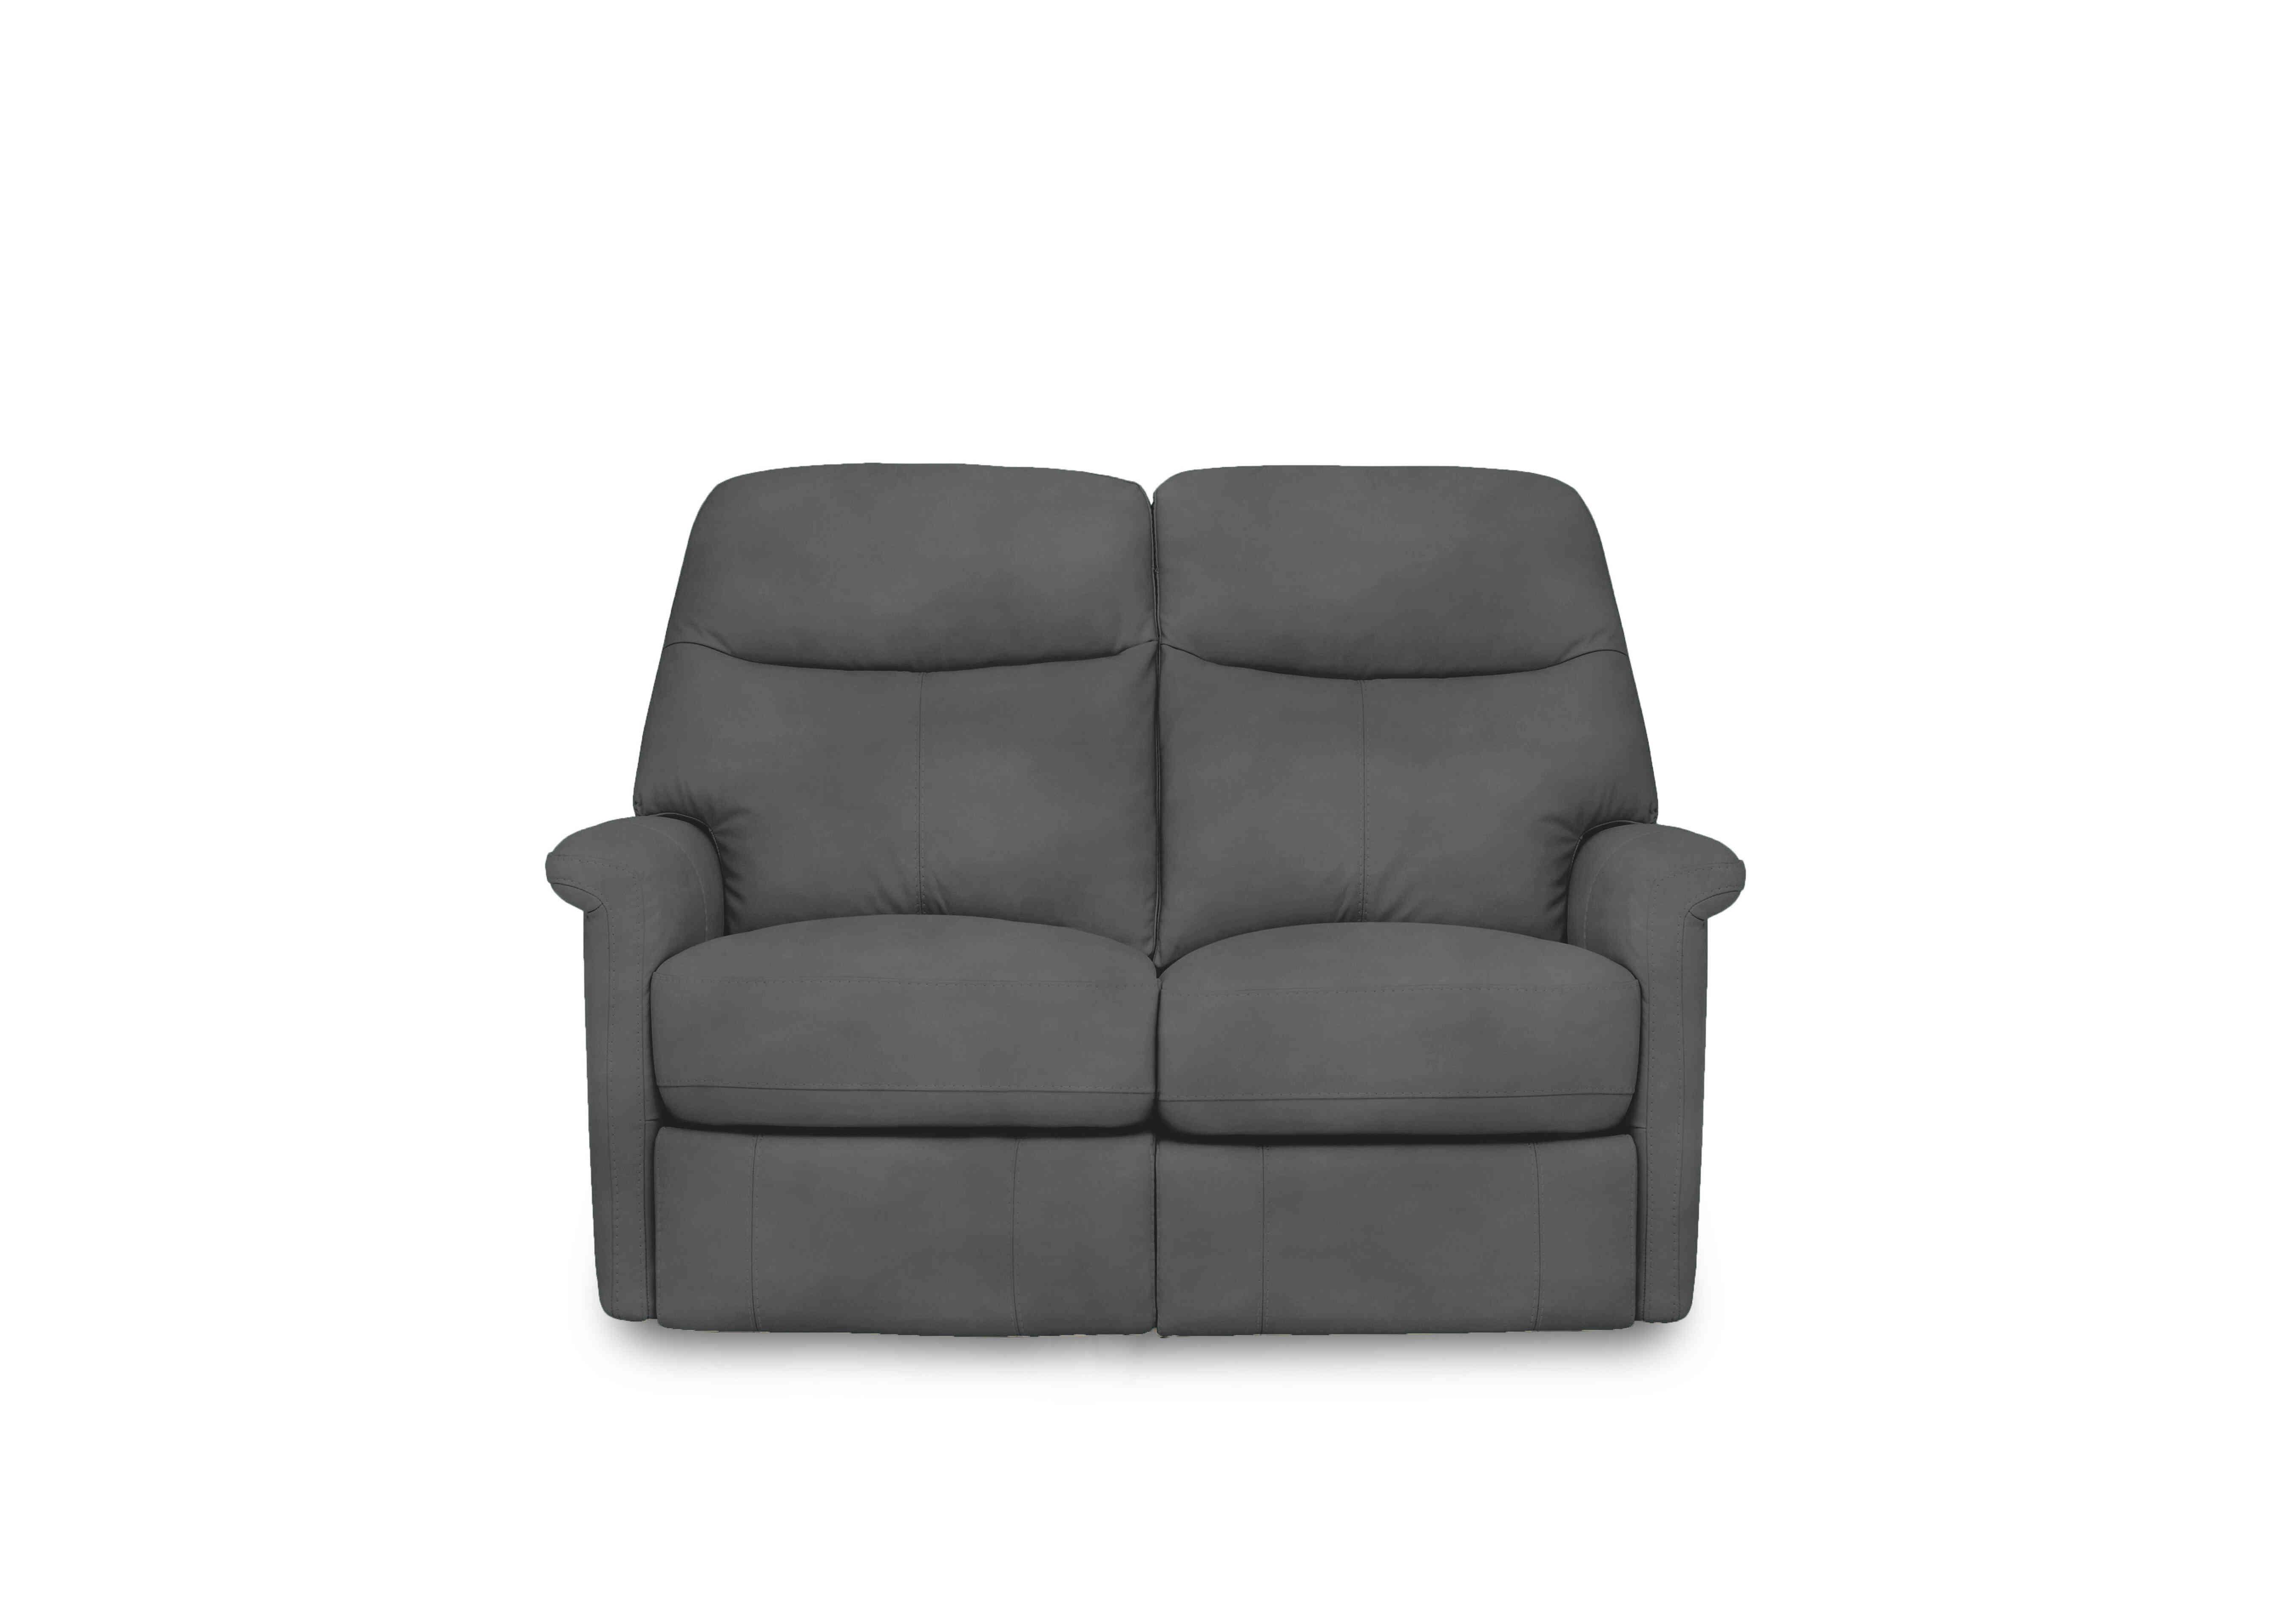 Compact Collection Lille 2 Seater Fabric Sofa in Fab-Meg-R20 Pewter on Furniture Village